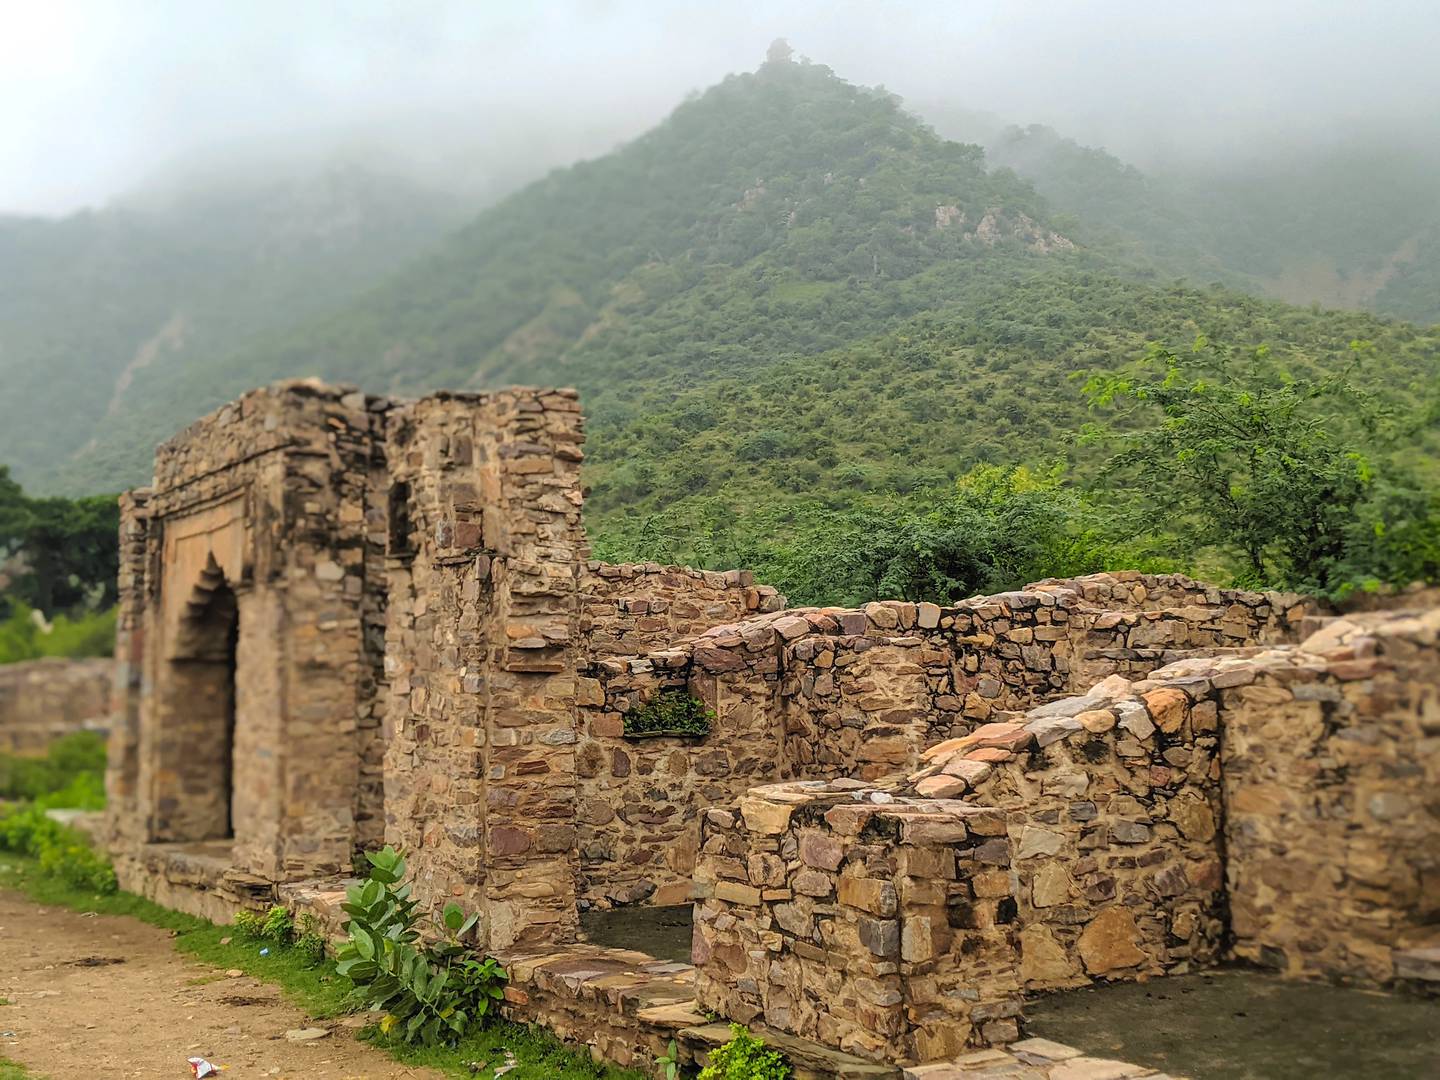 Market place ruins at Bhangarh fort